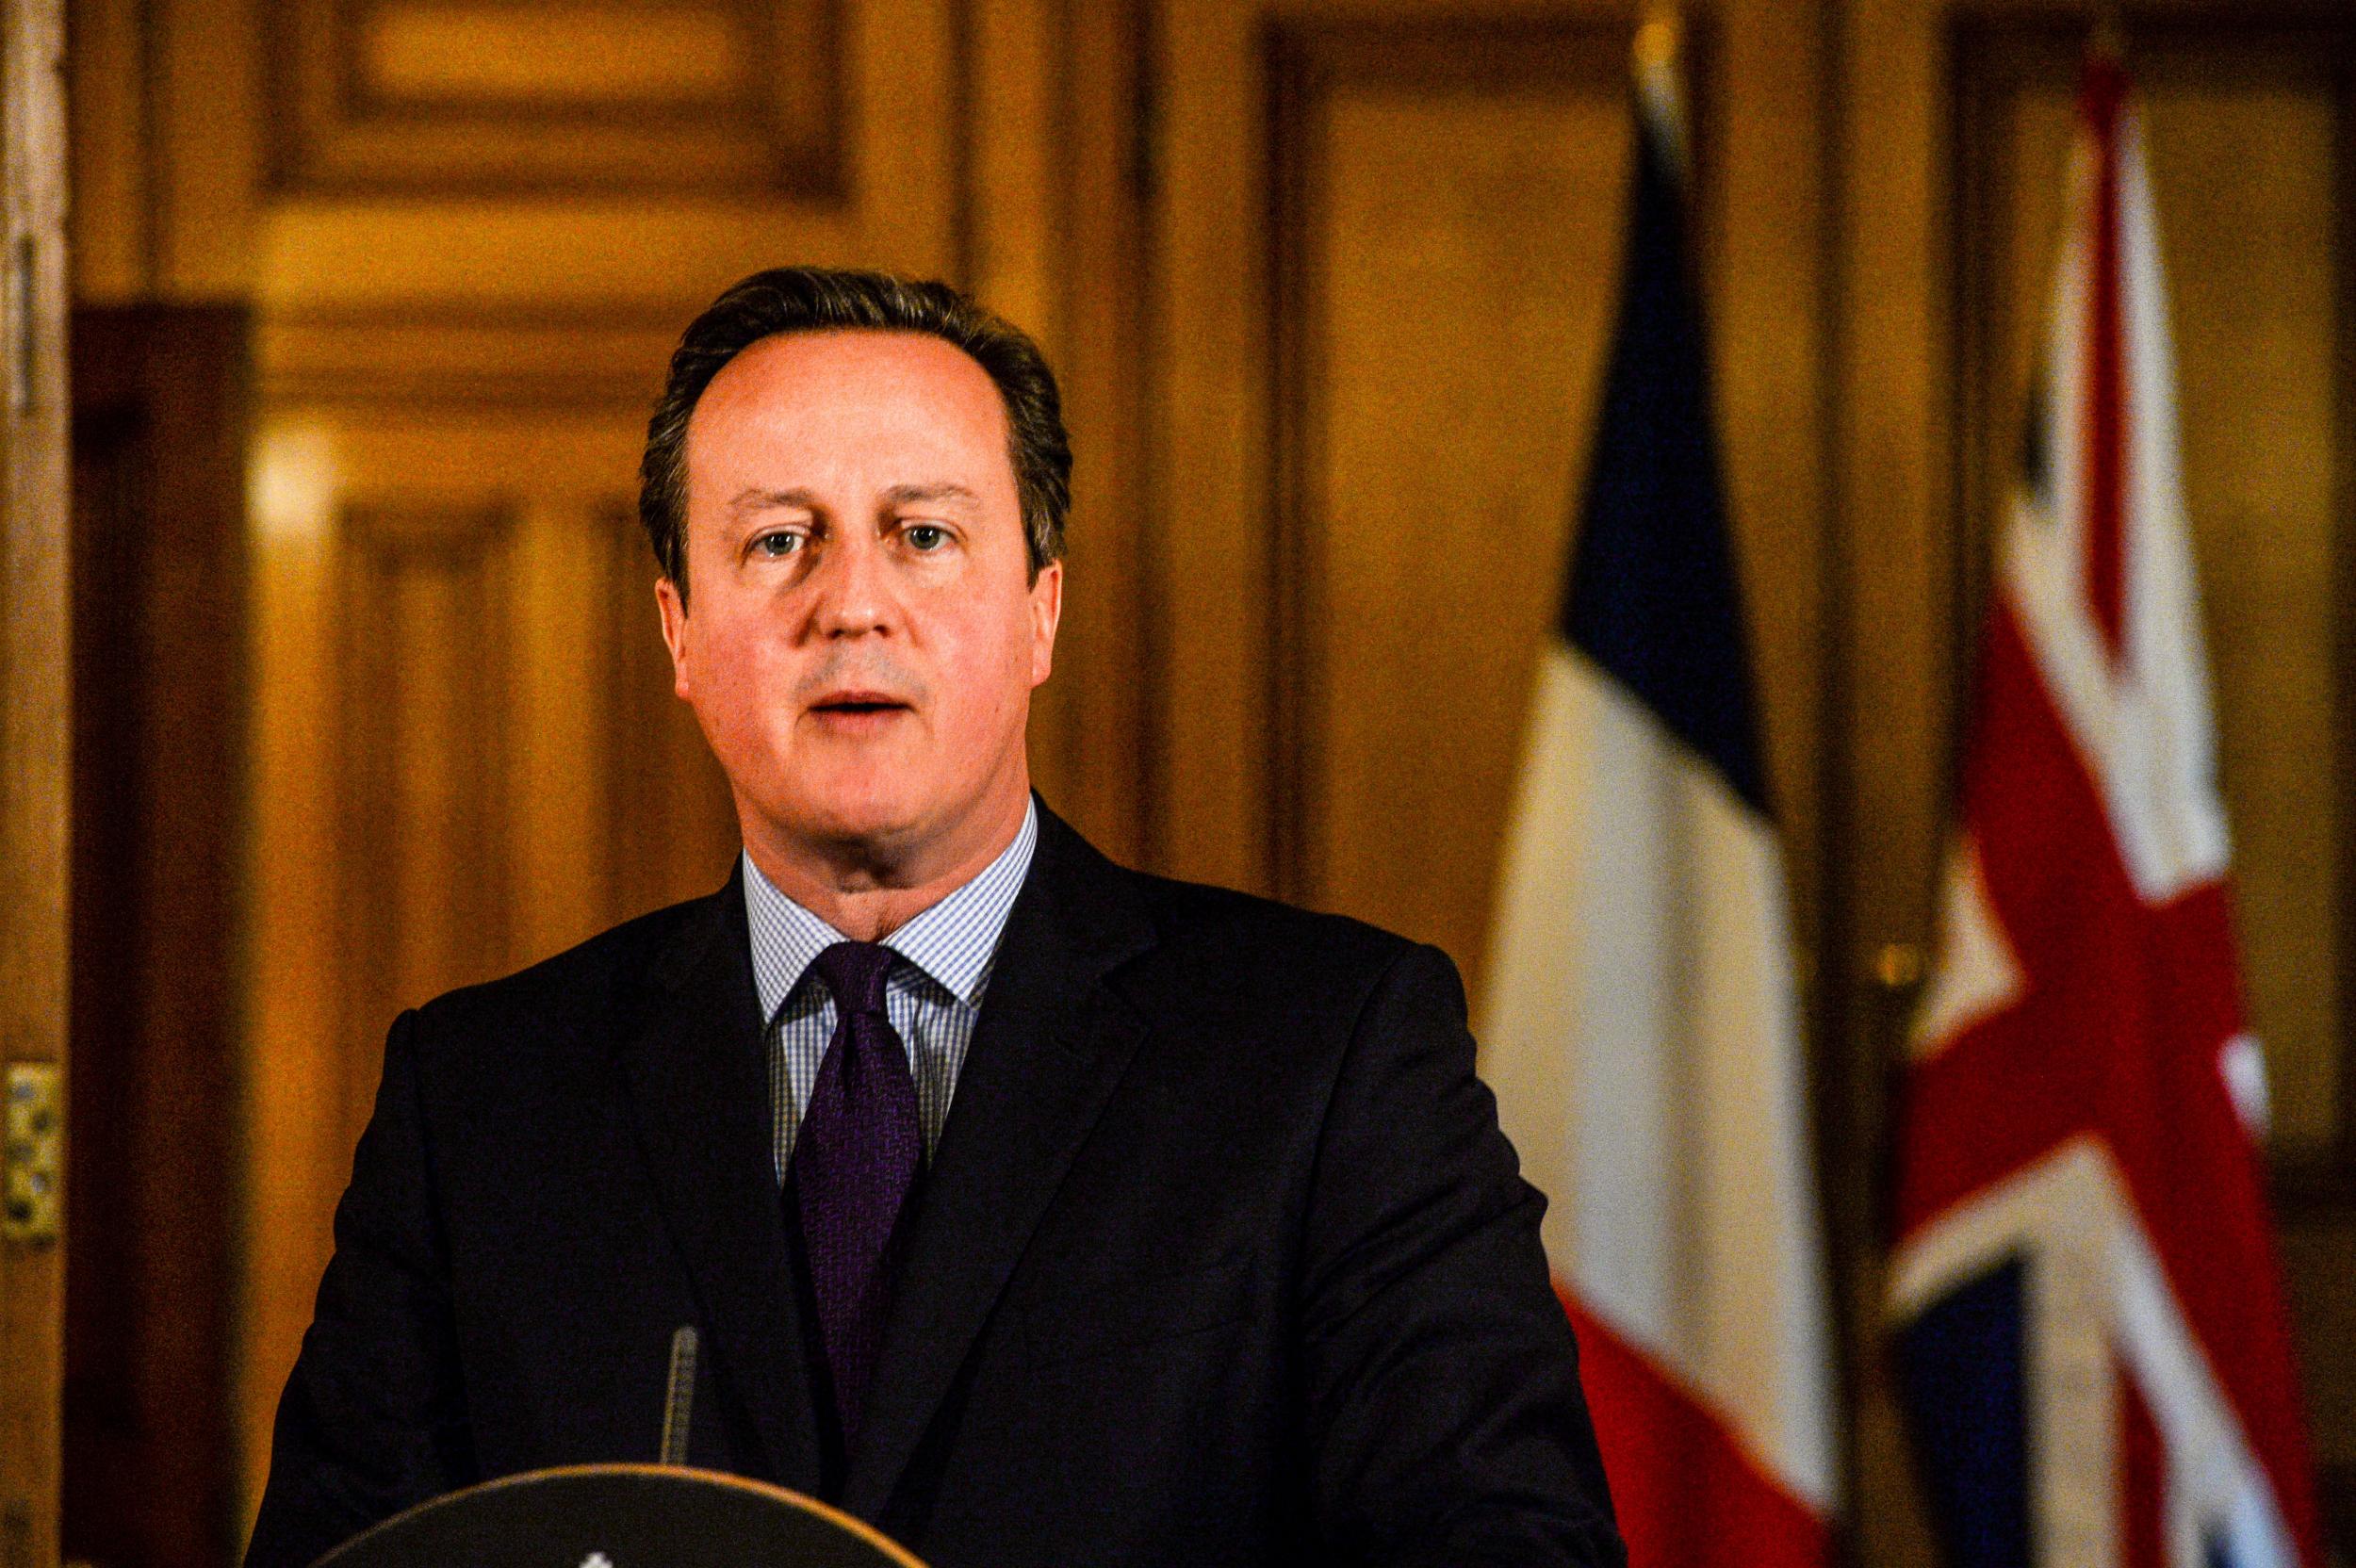 David Cameron accepts that in a free society 'you can never have 100% security'